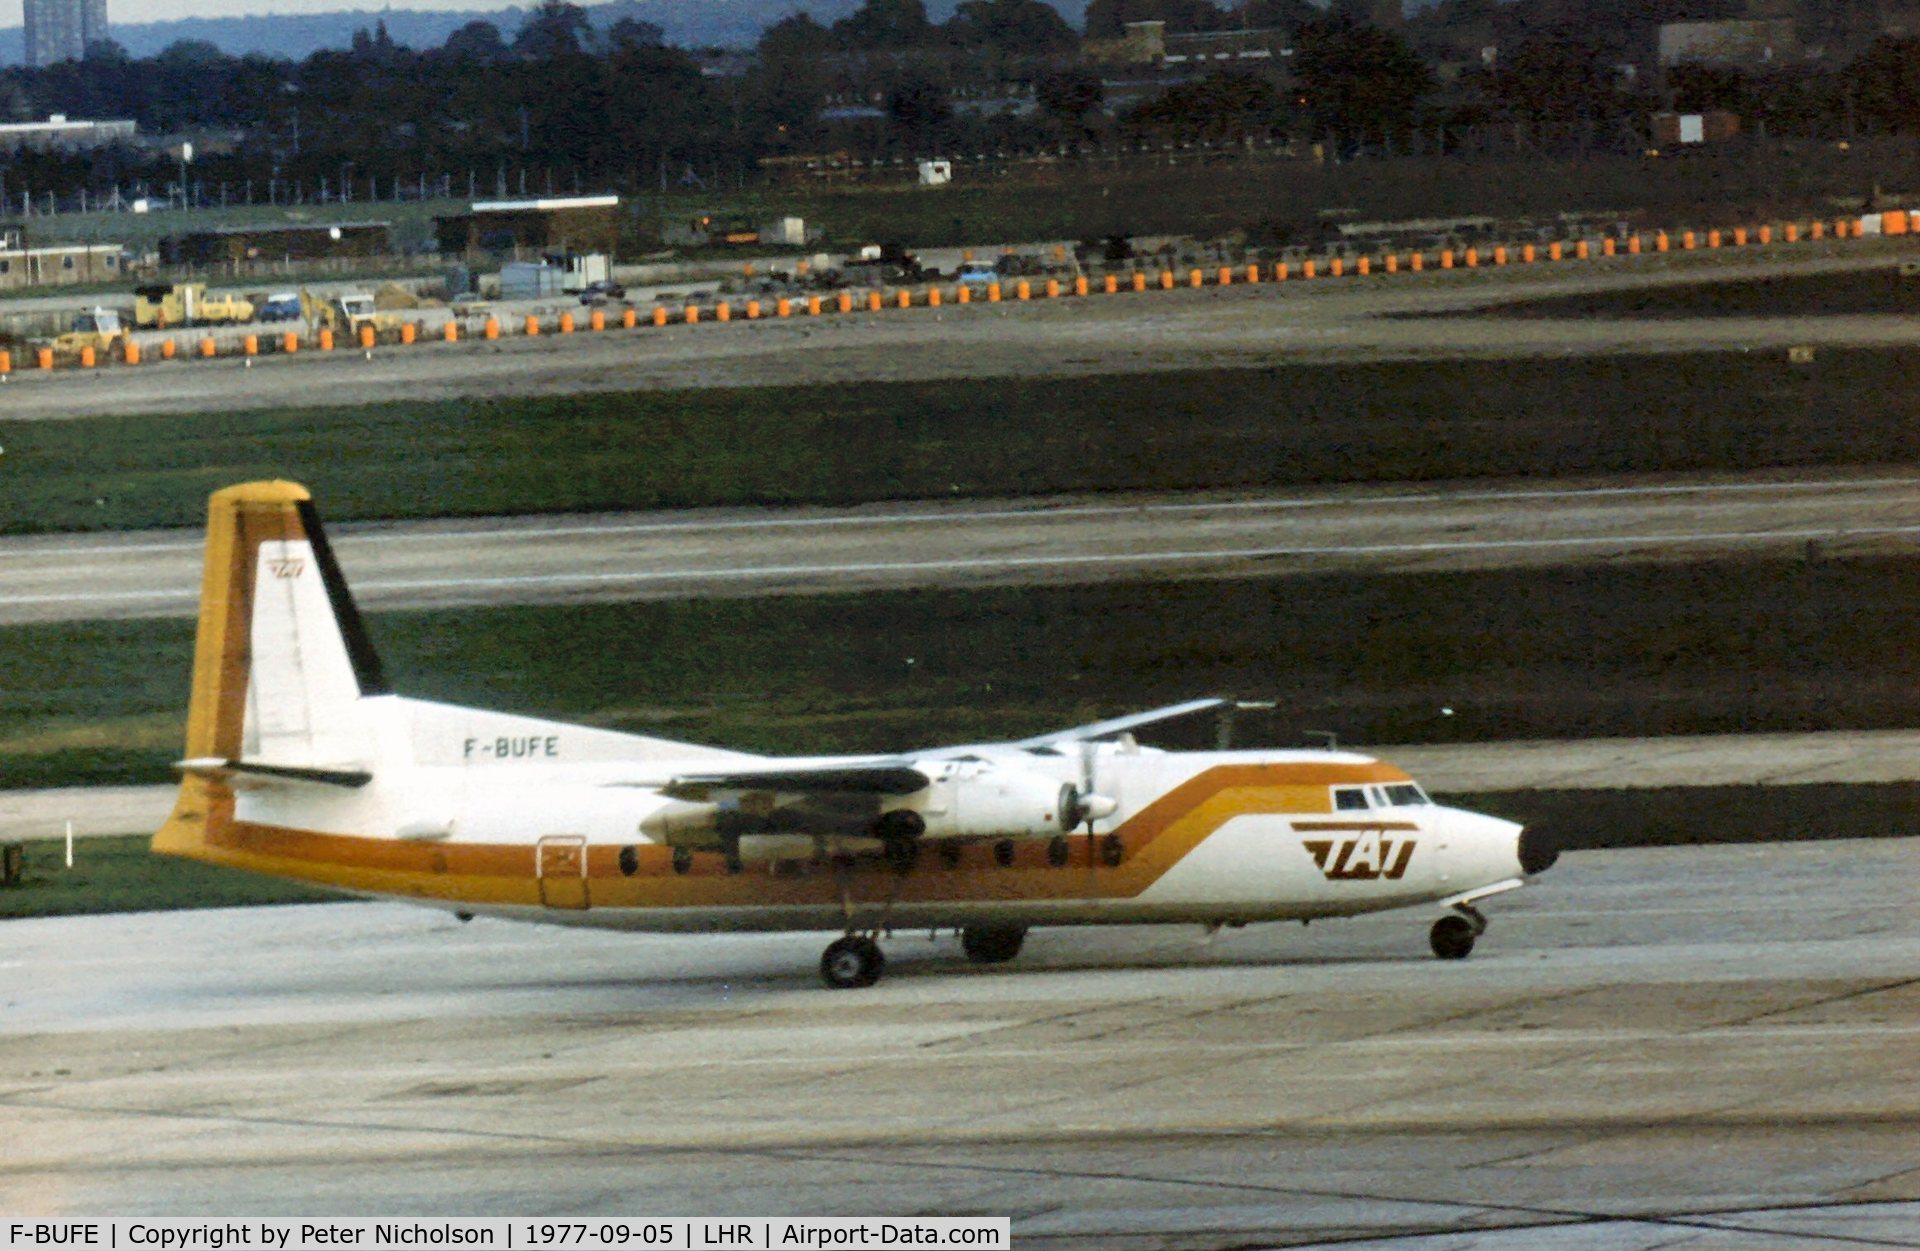 F-BUFE, 1964 Fokker F-27-200 Friendship C/N 10243, Friendship of TAT Touraine Air Transport as seen at London Heathrow in the Summer of 1977.